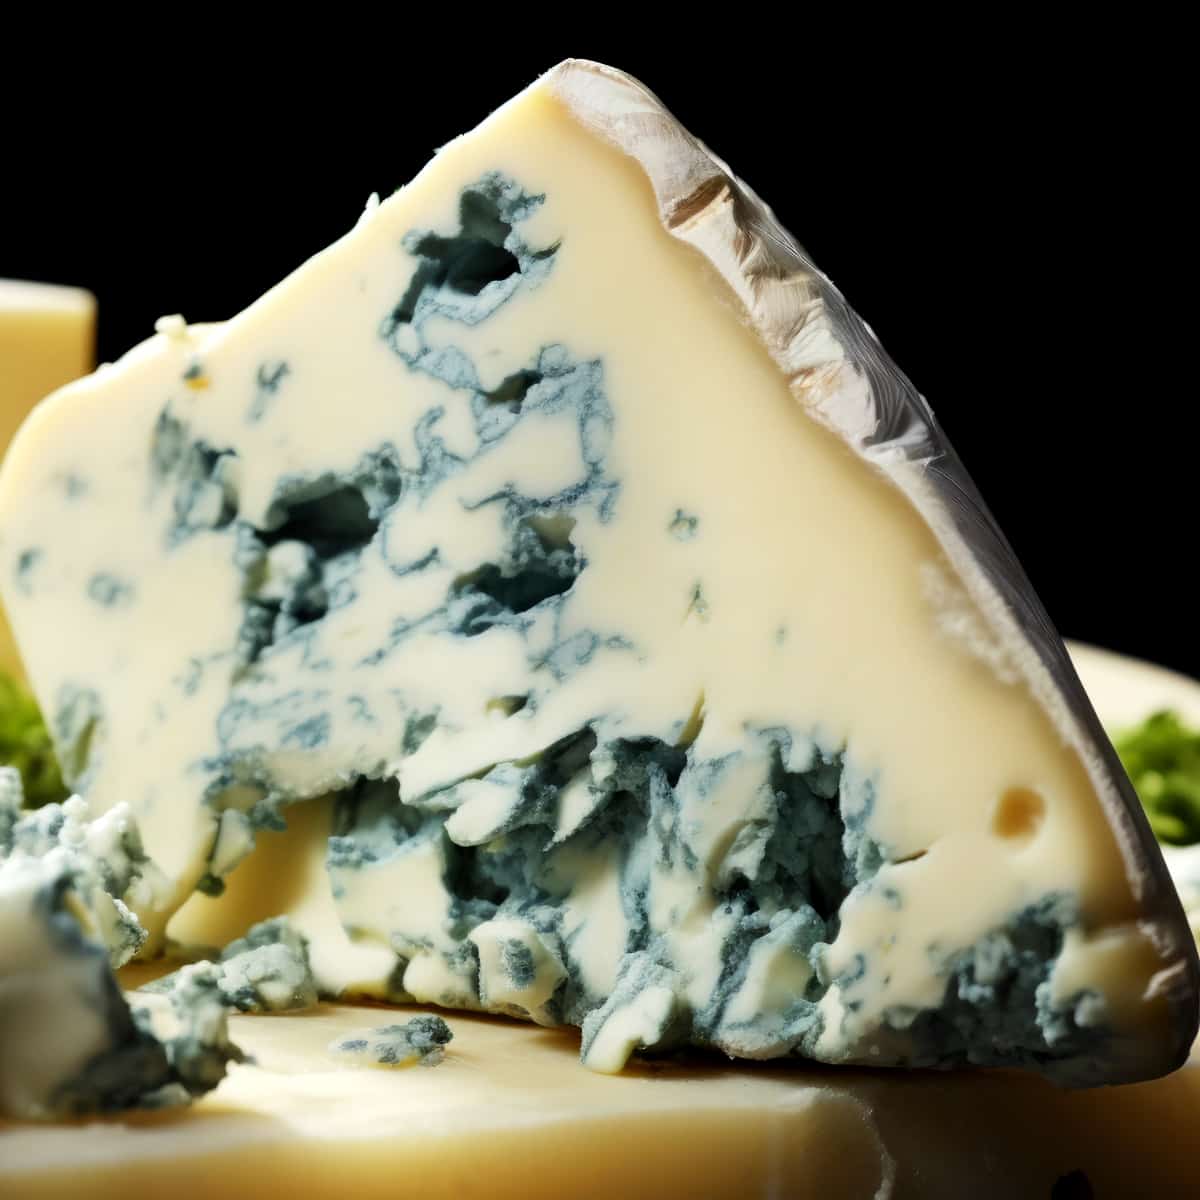 a brick of blue cheese showing the natural clue veining